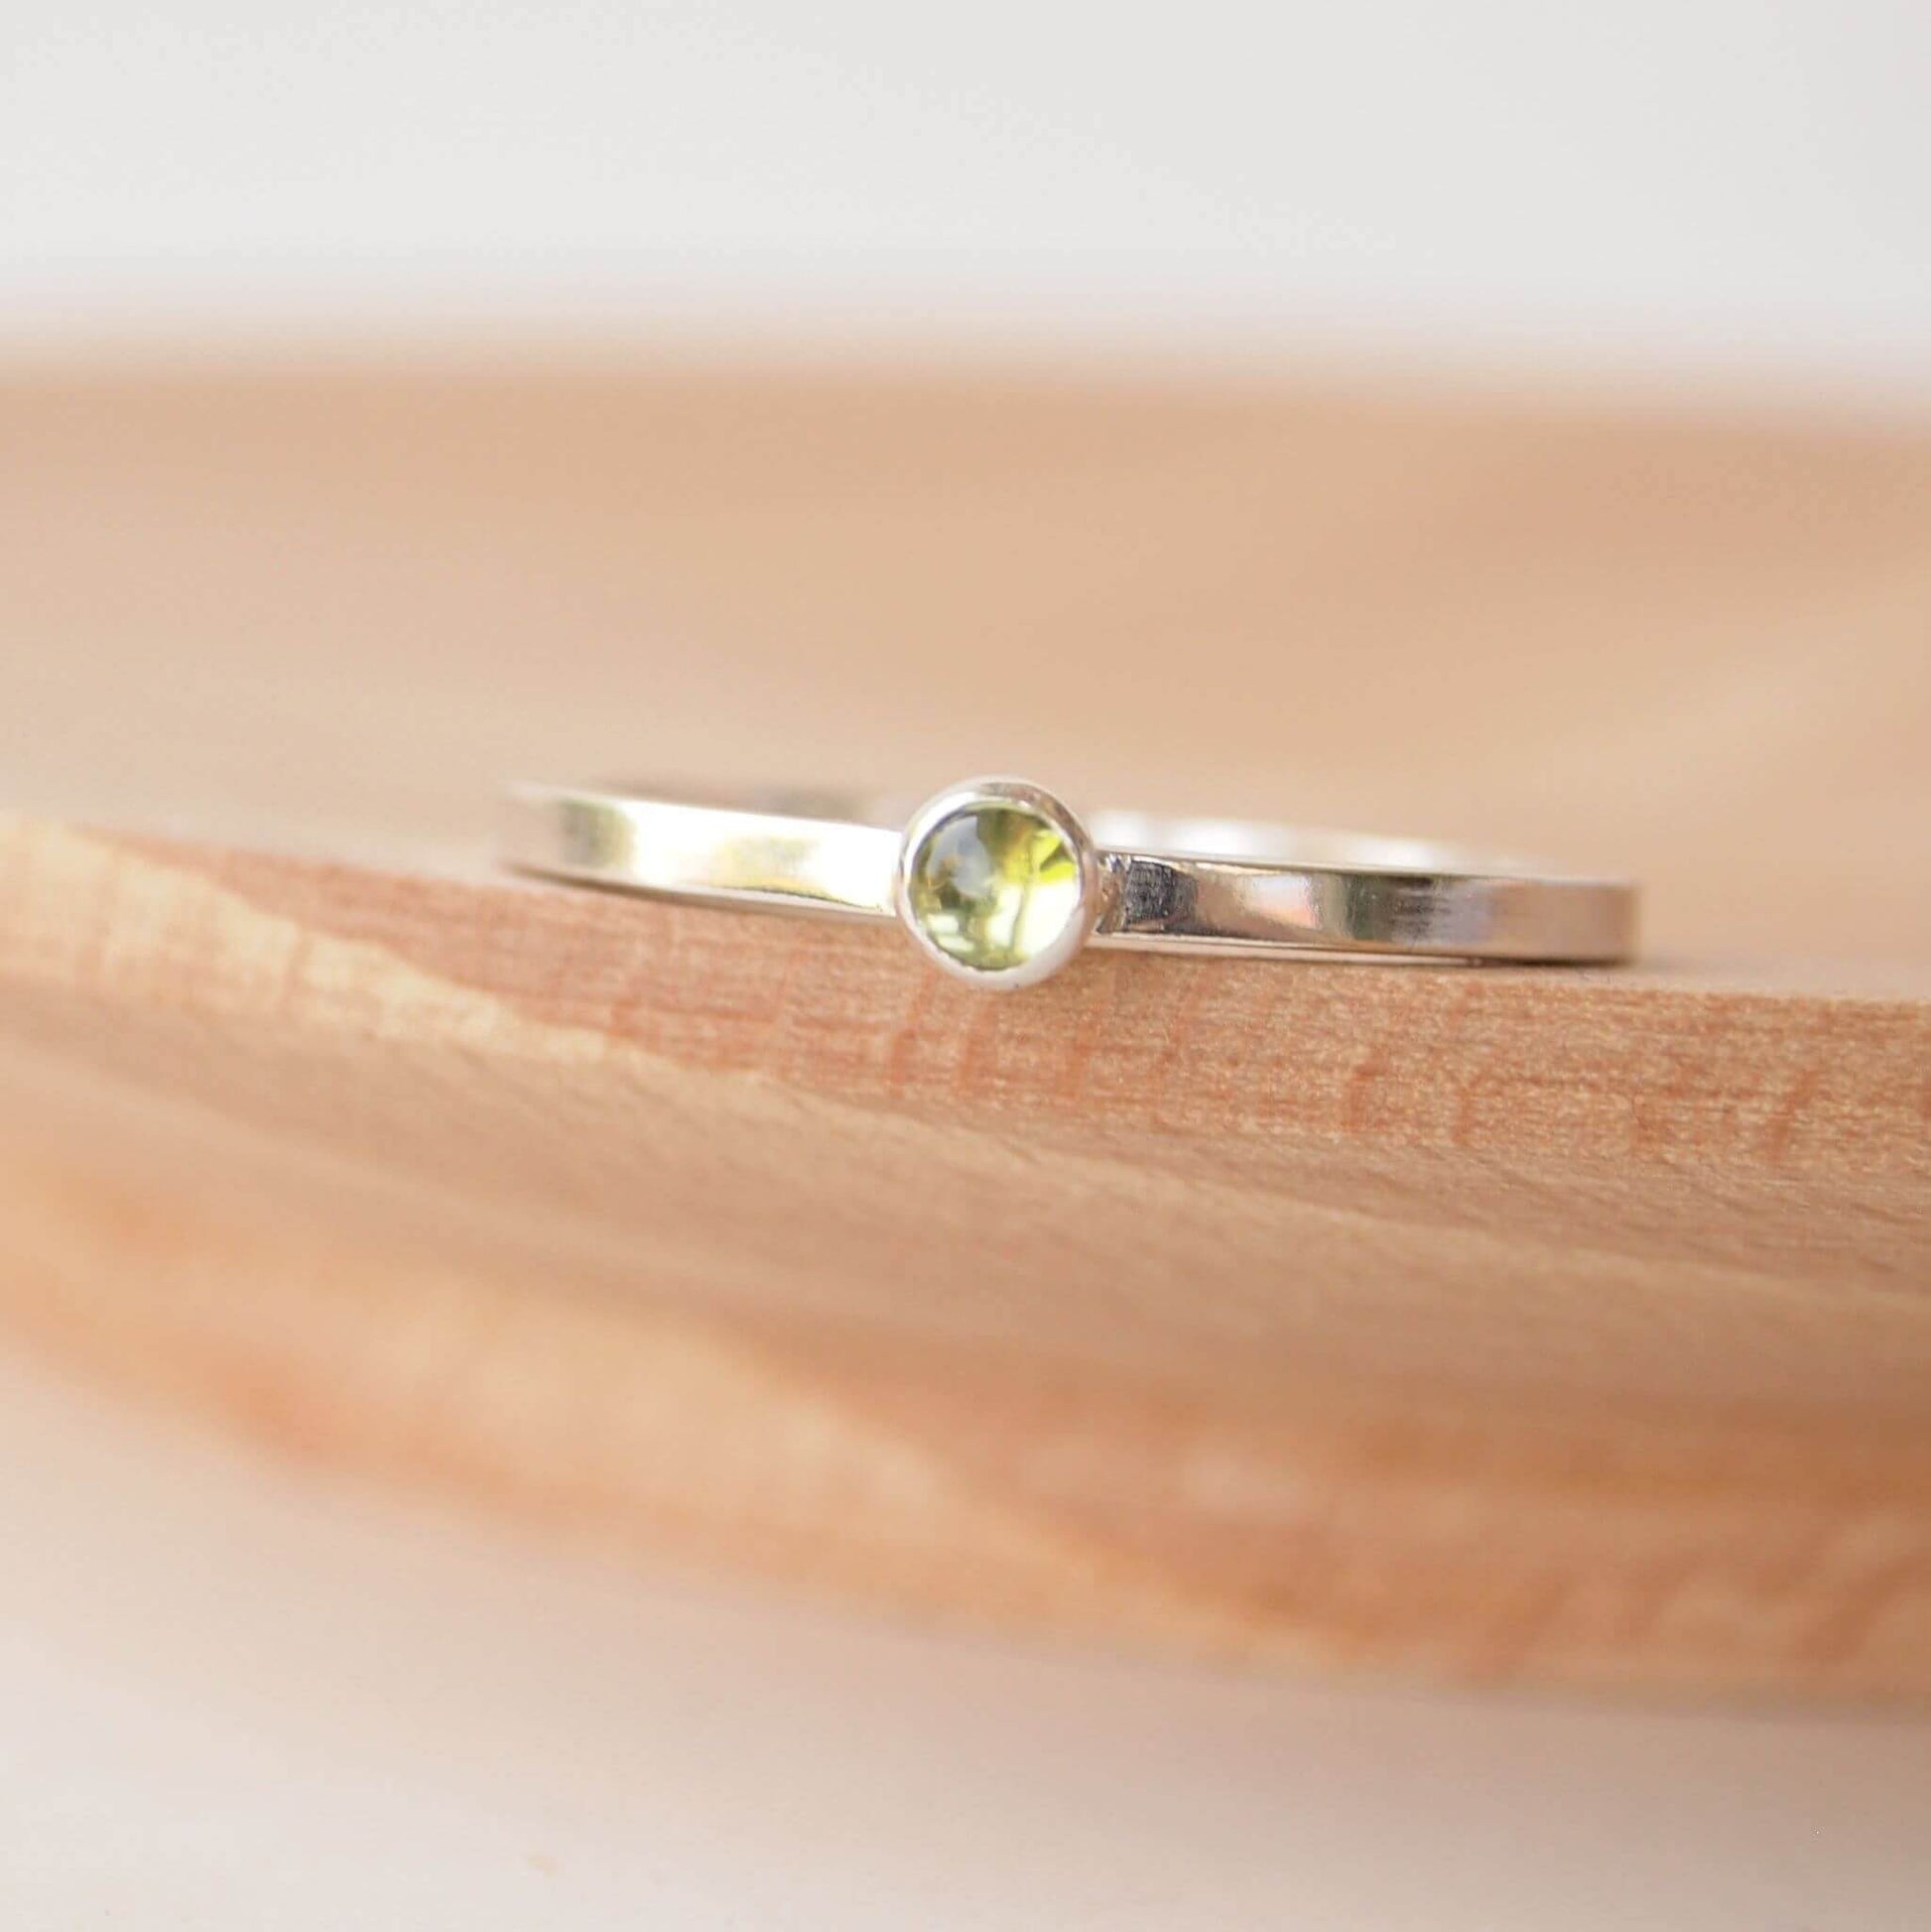 Small Peridot gemstone ring in sterling silver with a modern square band with a 3mm sized round moss green Peridot. Handmade in Edinburgh by Maram Jewellery